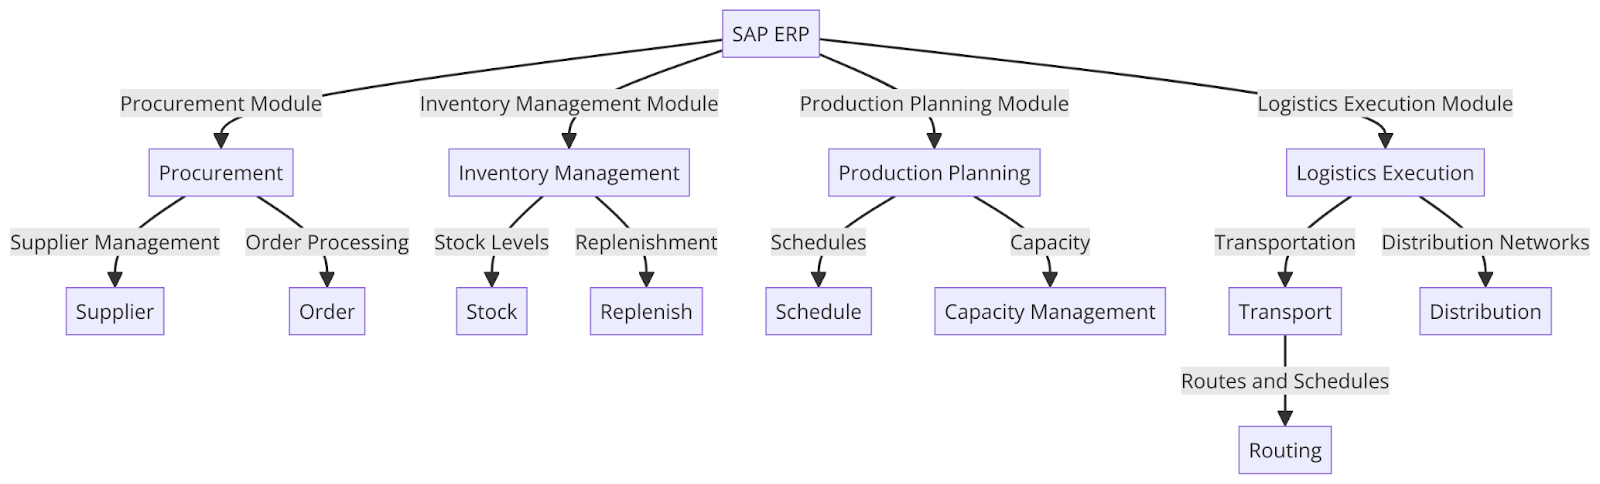 SAP Supply Chain Modules Overview